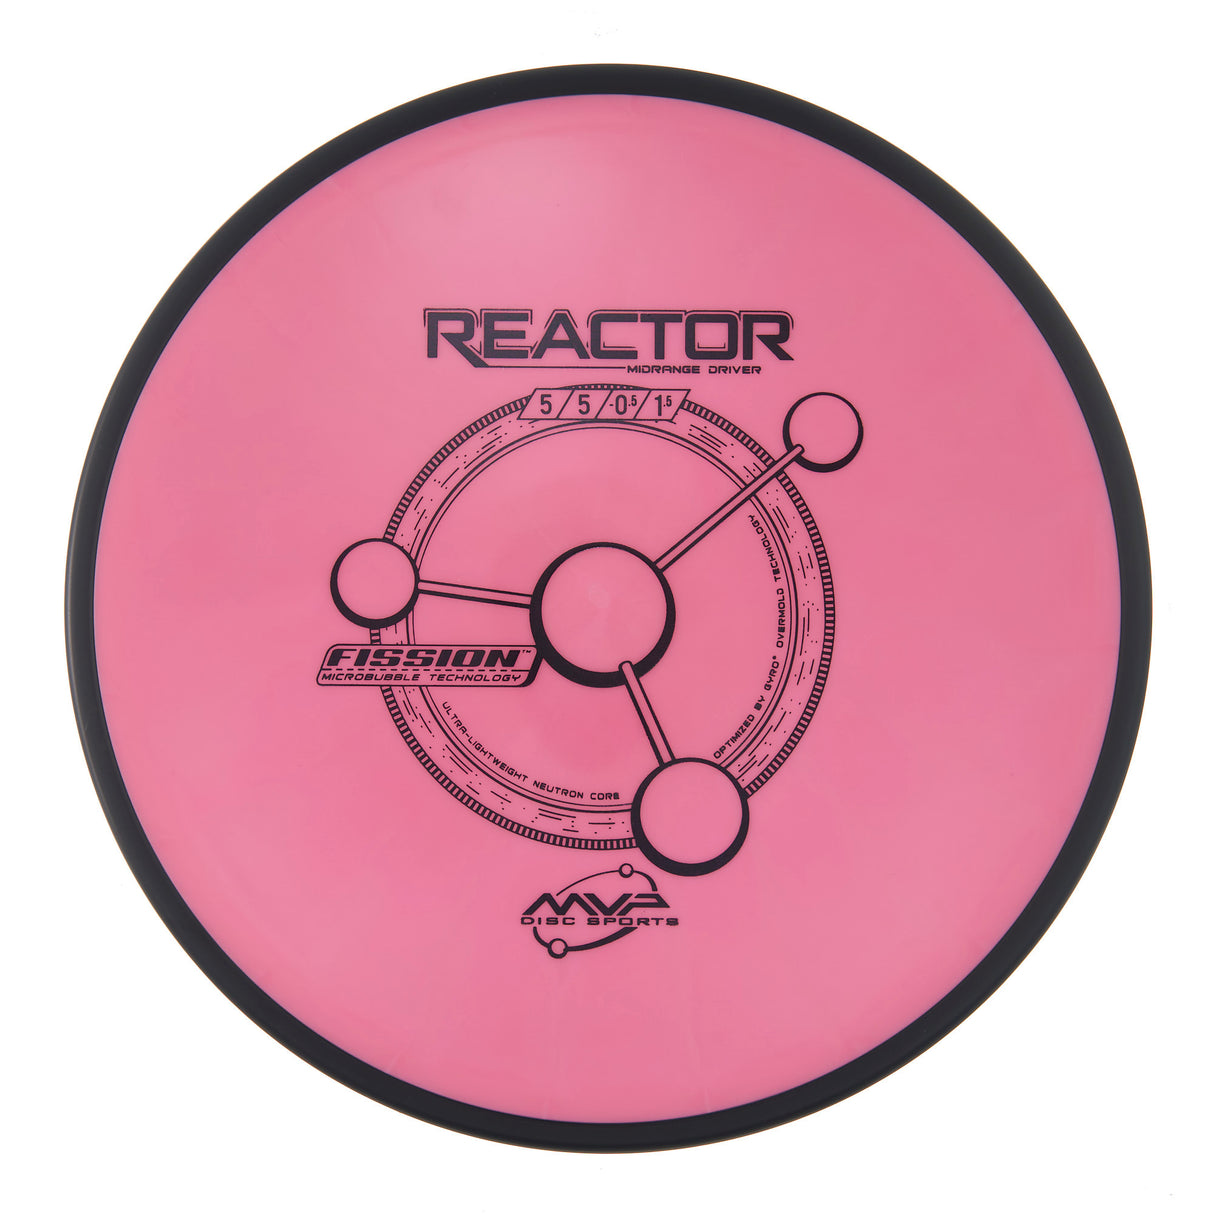 MVP Reactor - Fission 159g | Style 0010